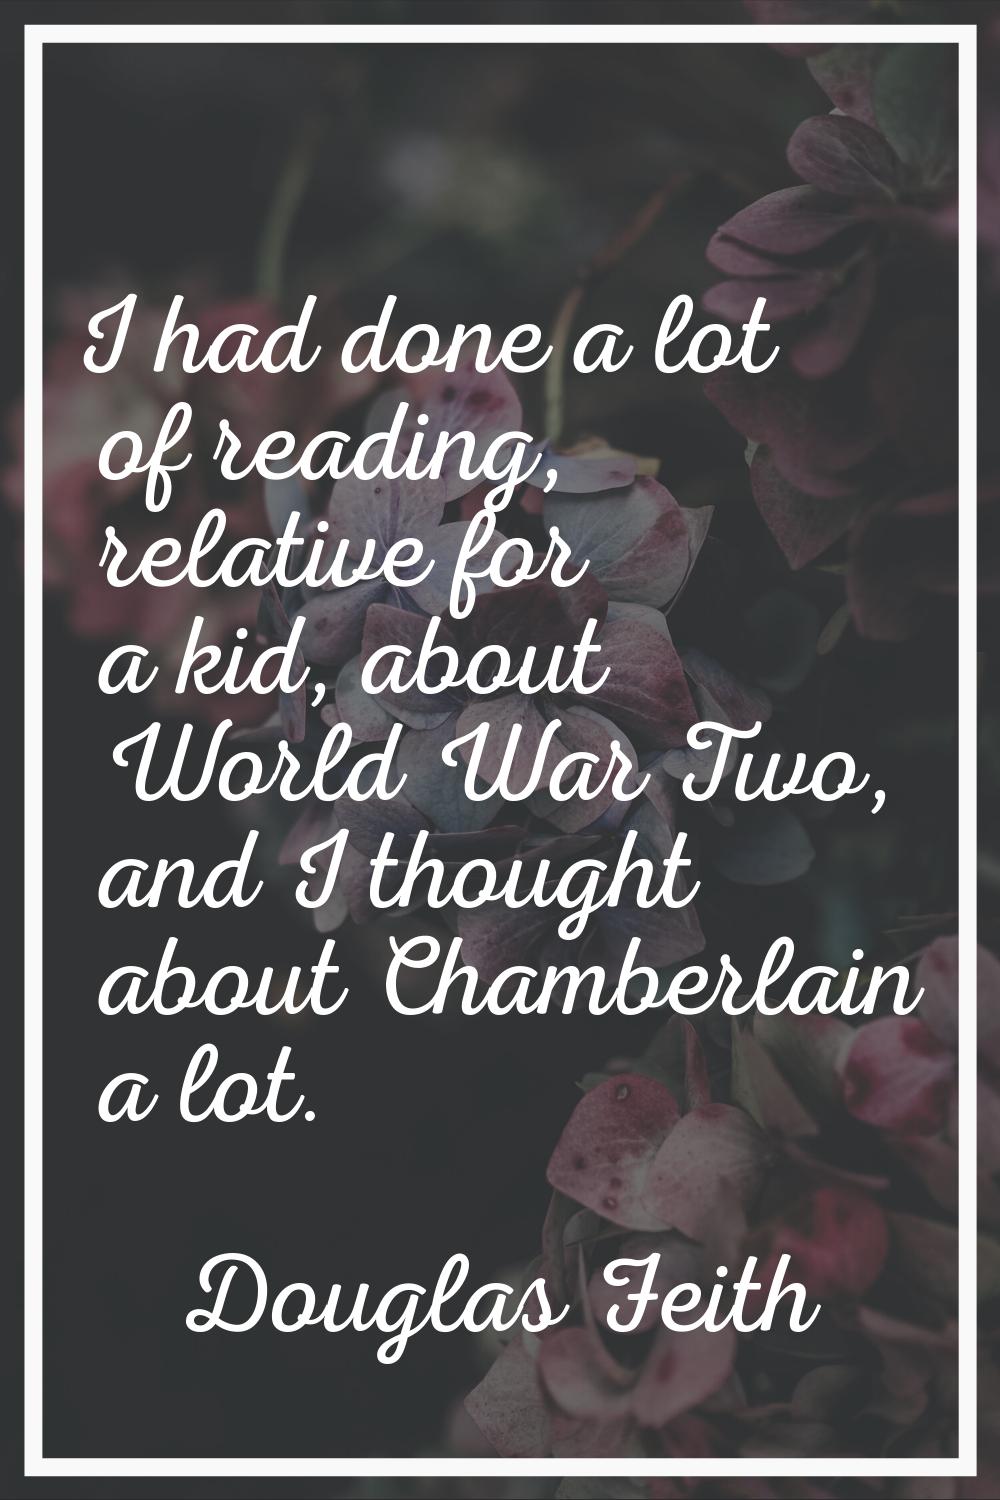 I had done a lot of reading, relative for a kid, about World War Two, and I thought about Chamberla